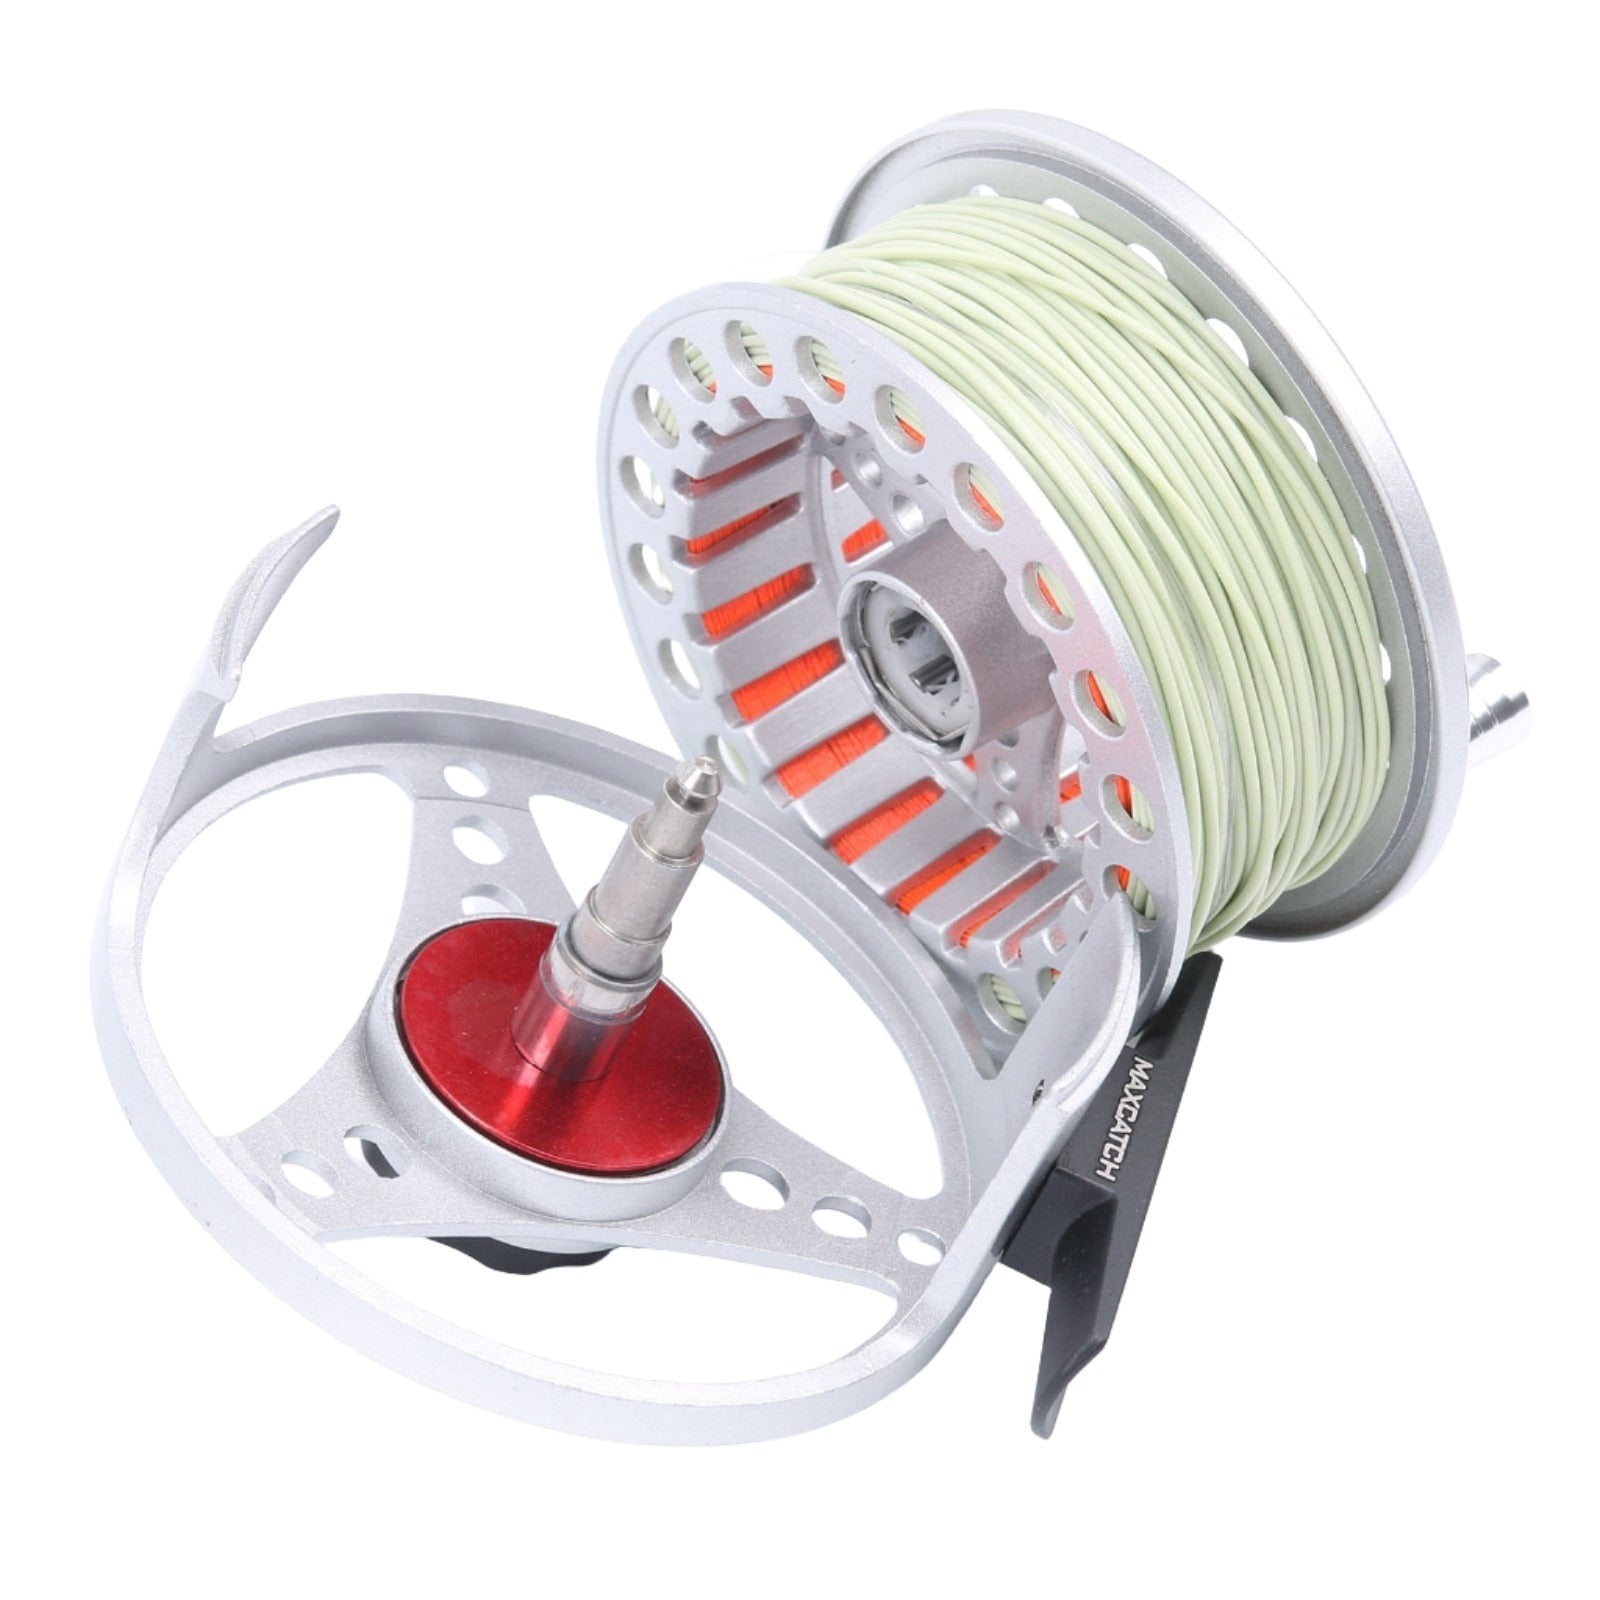 Maximumcatch 3-8WT Plastic/Aluminum Large Arbor Pre-spooled Fly Fishing Reel  with Floating Fly Line